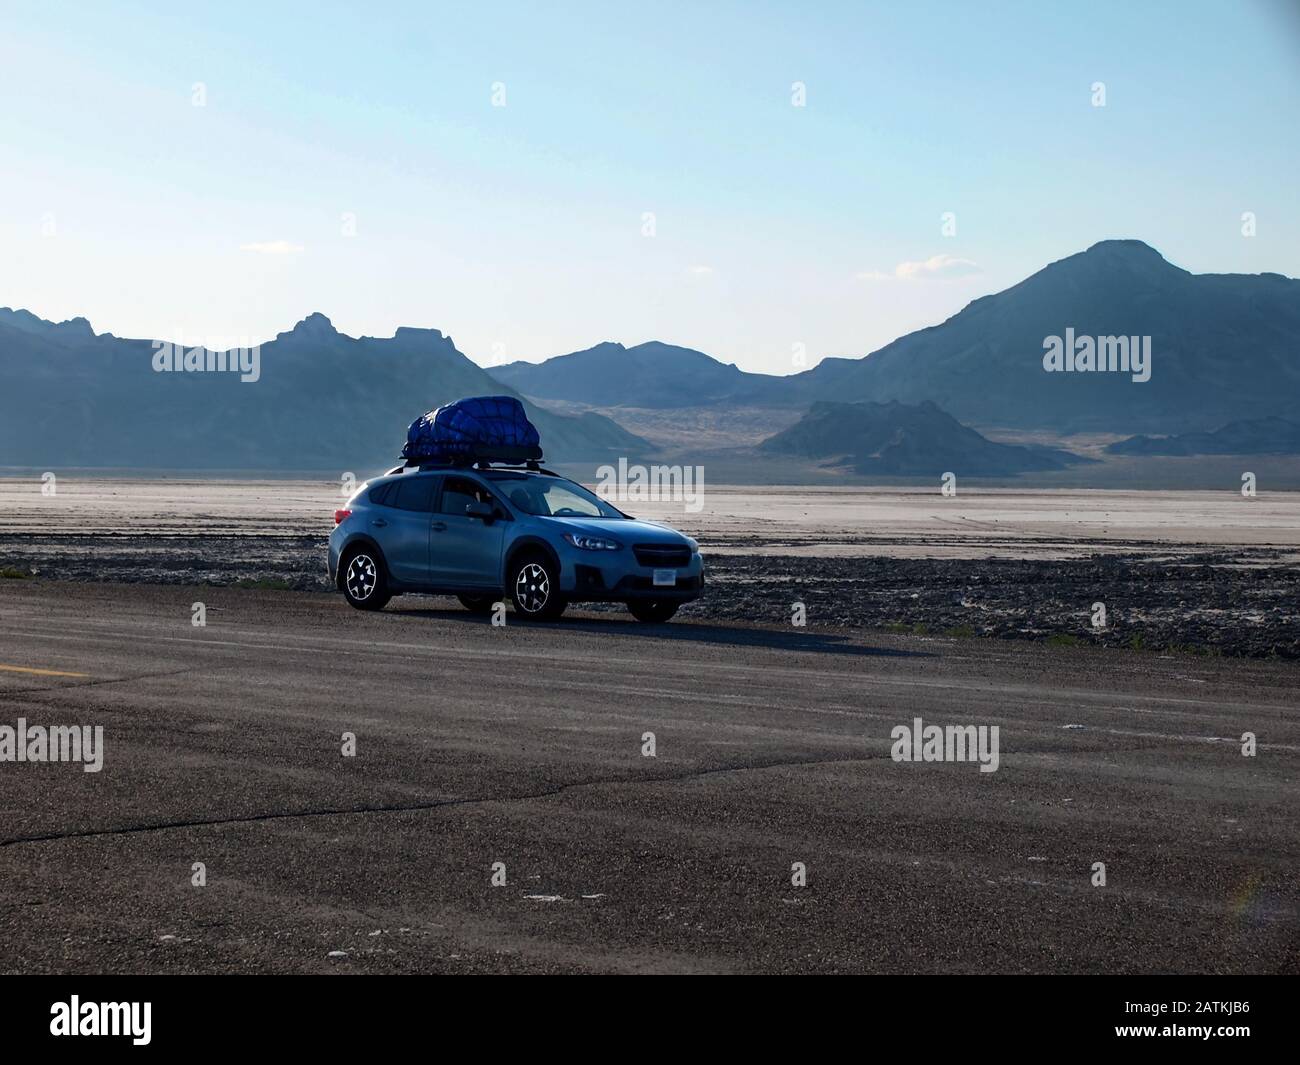 A hatchback four wheel drive automobile packed with camping gear on top is parked on the asphalt next to the Bonneville Salt Flats in the mountainous Stock Photo